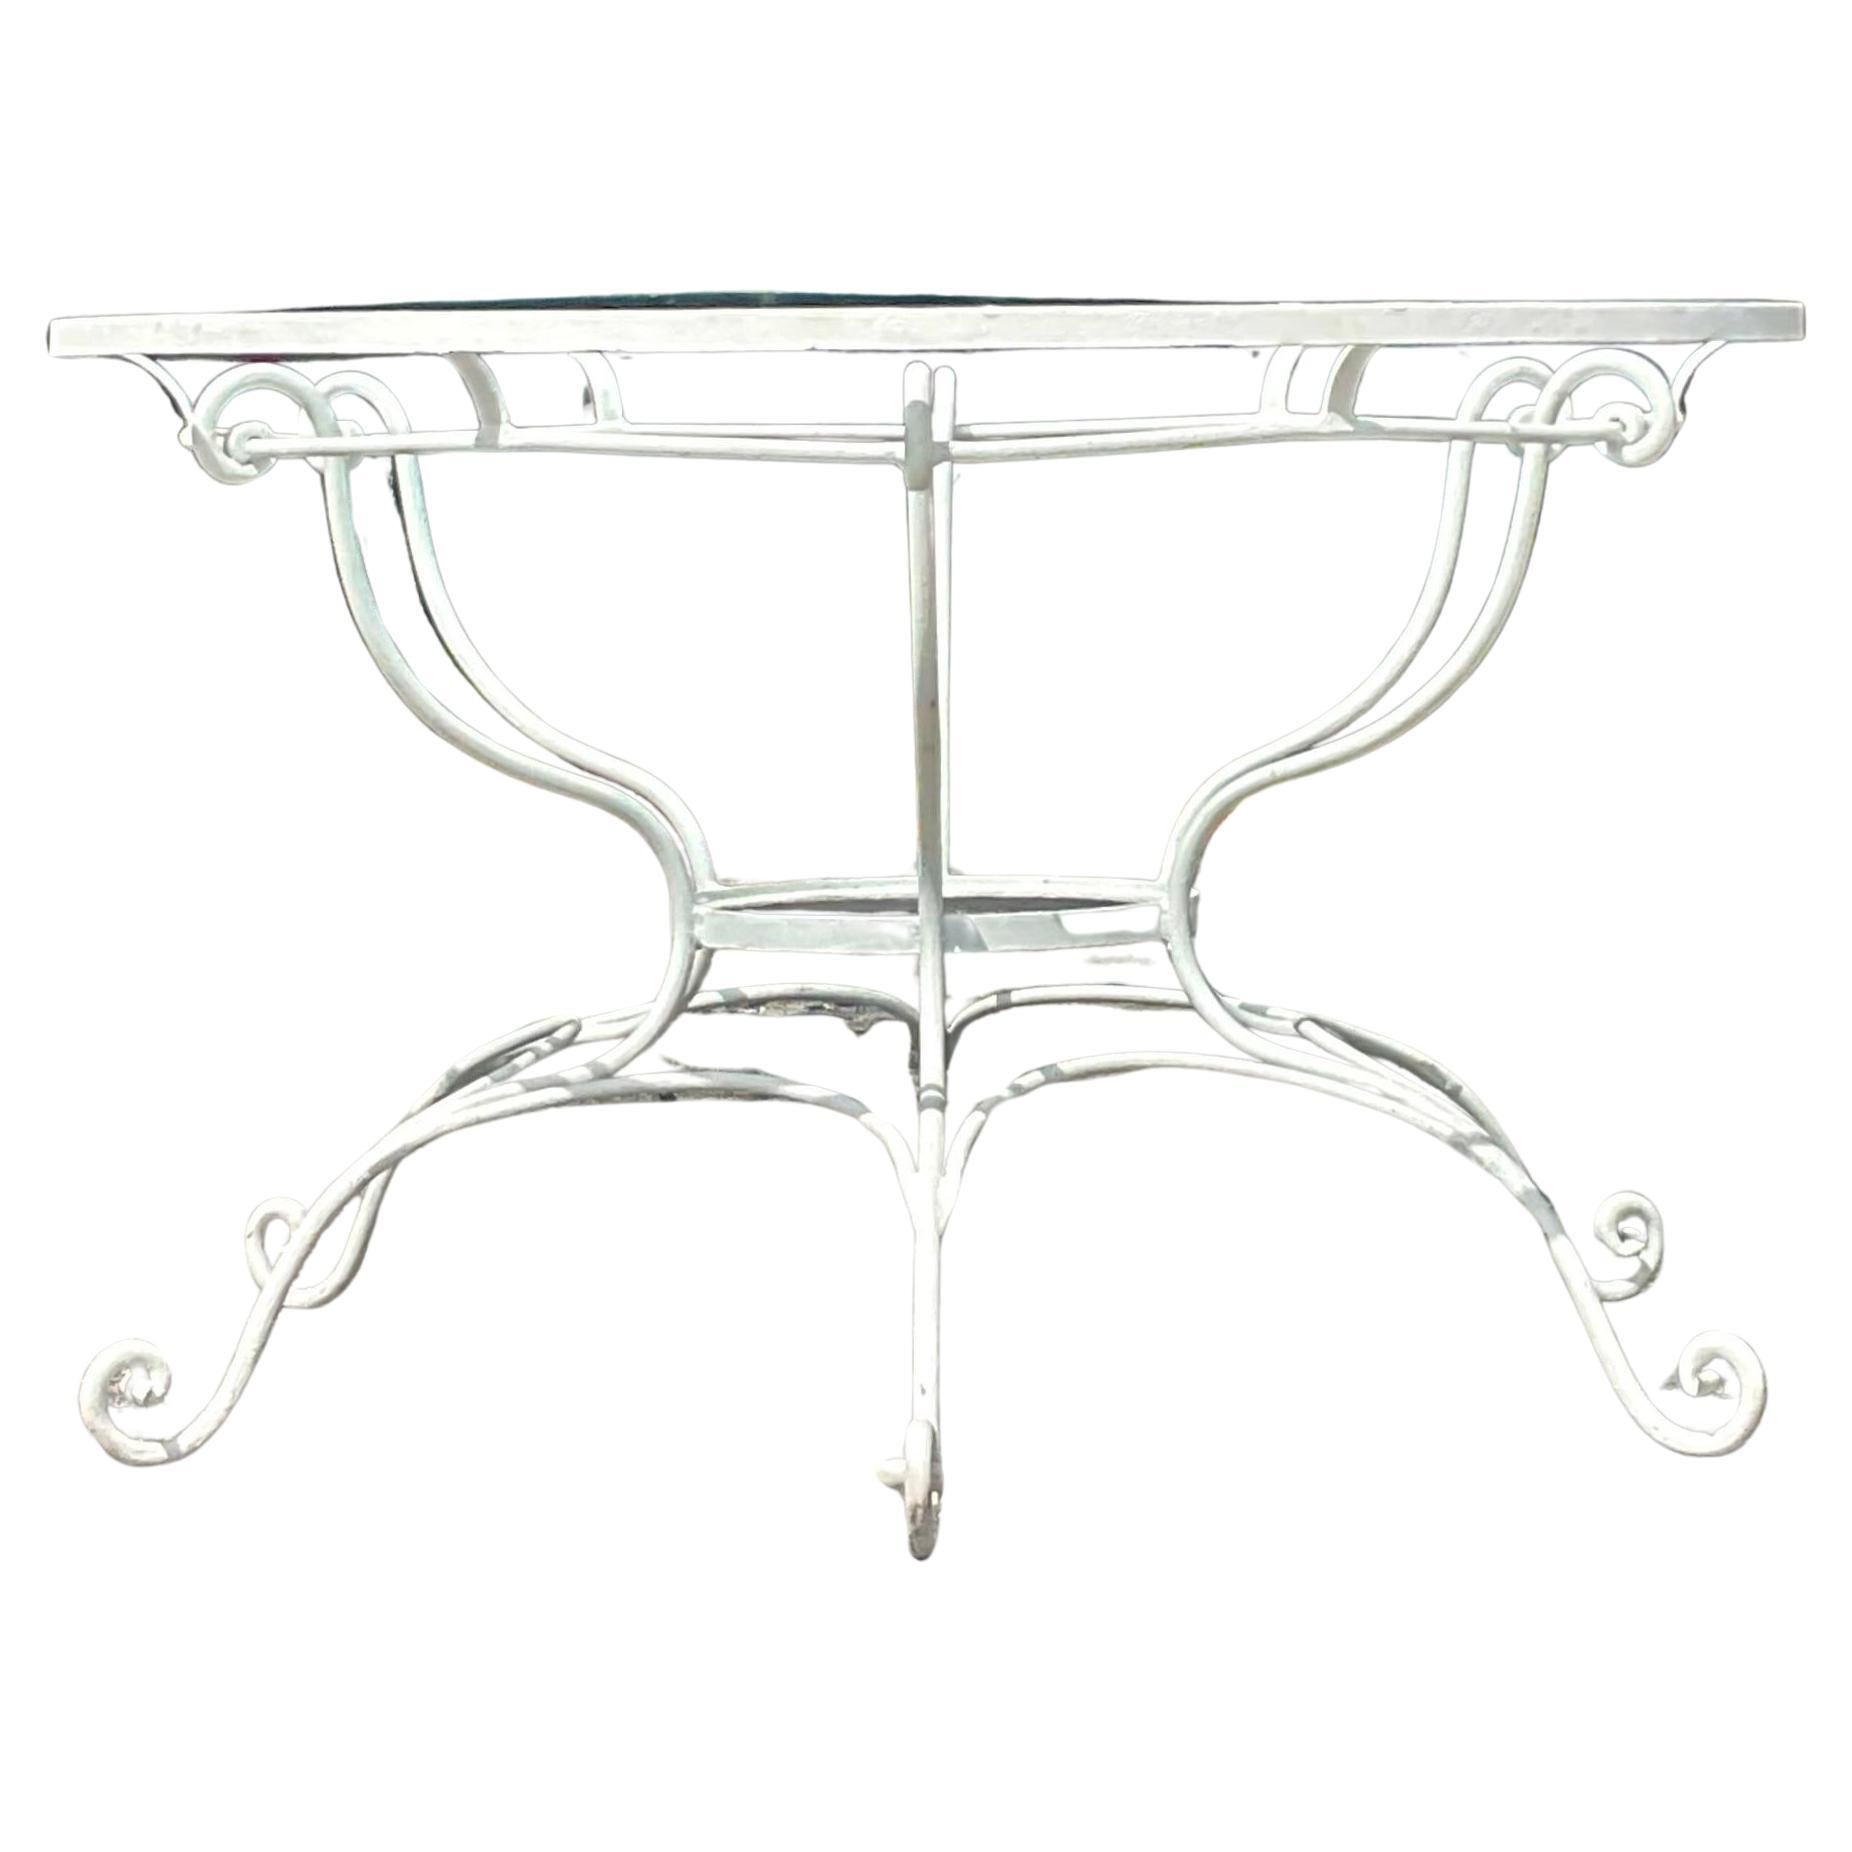 Vintage Coastal Wrought Iron Scroll Dining Table